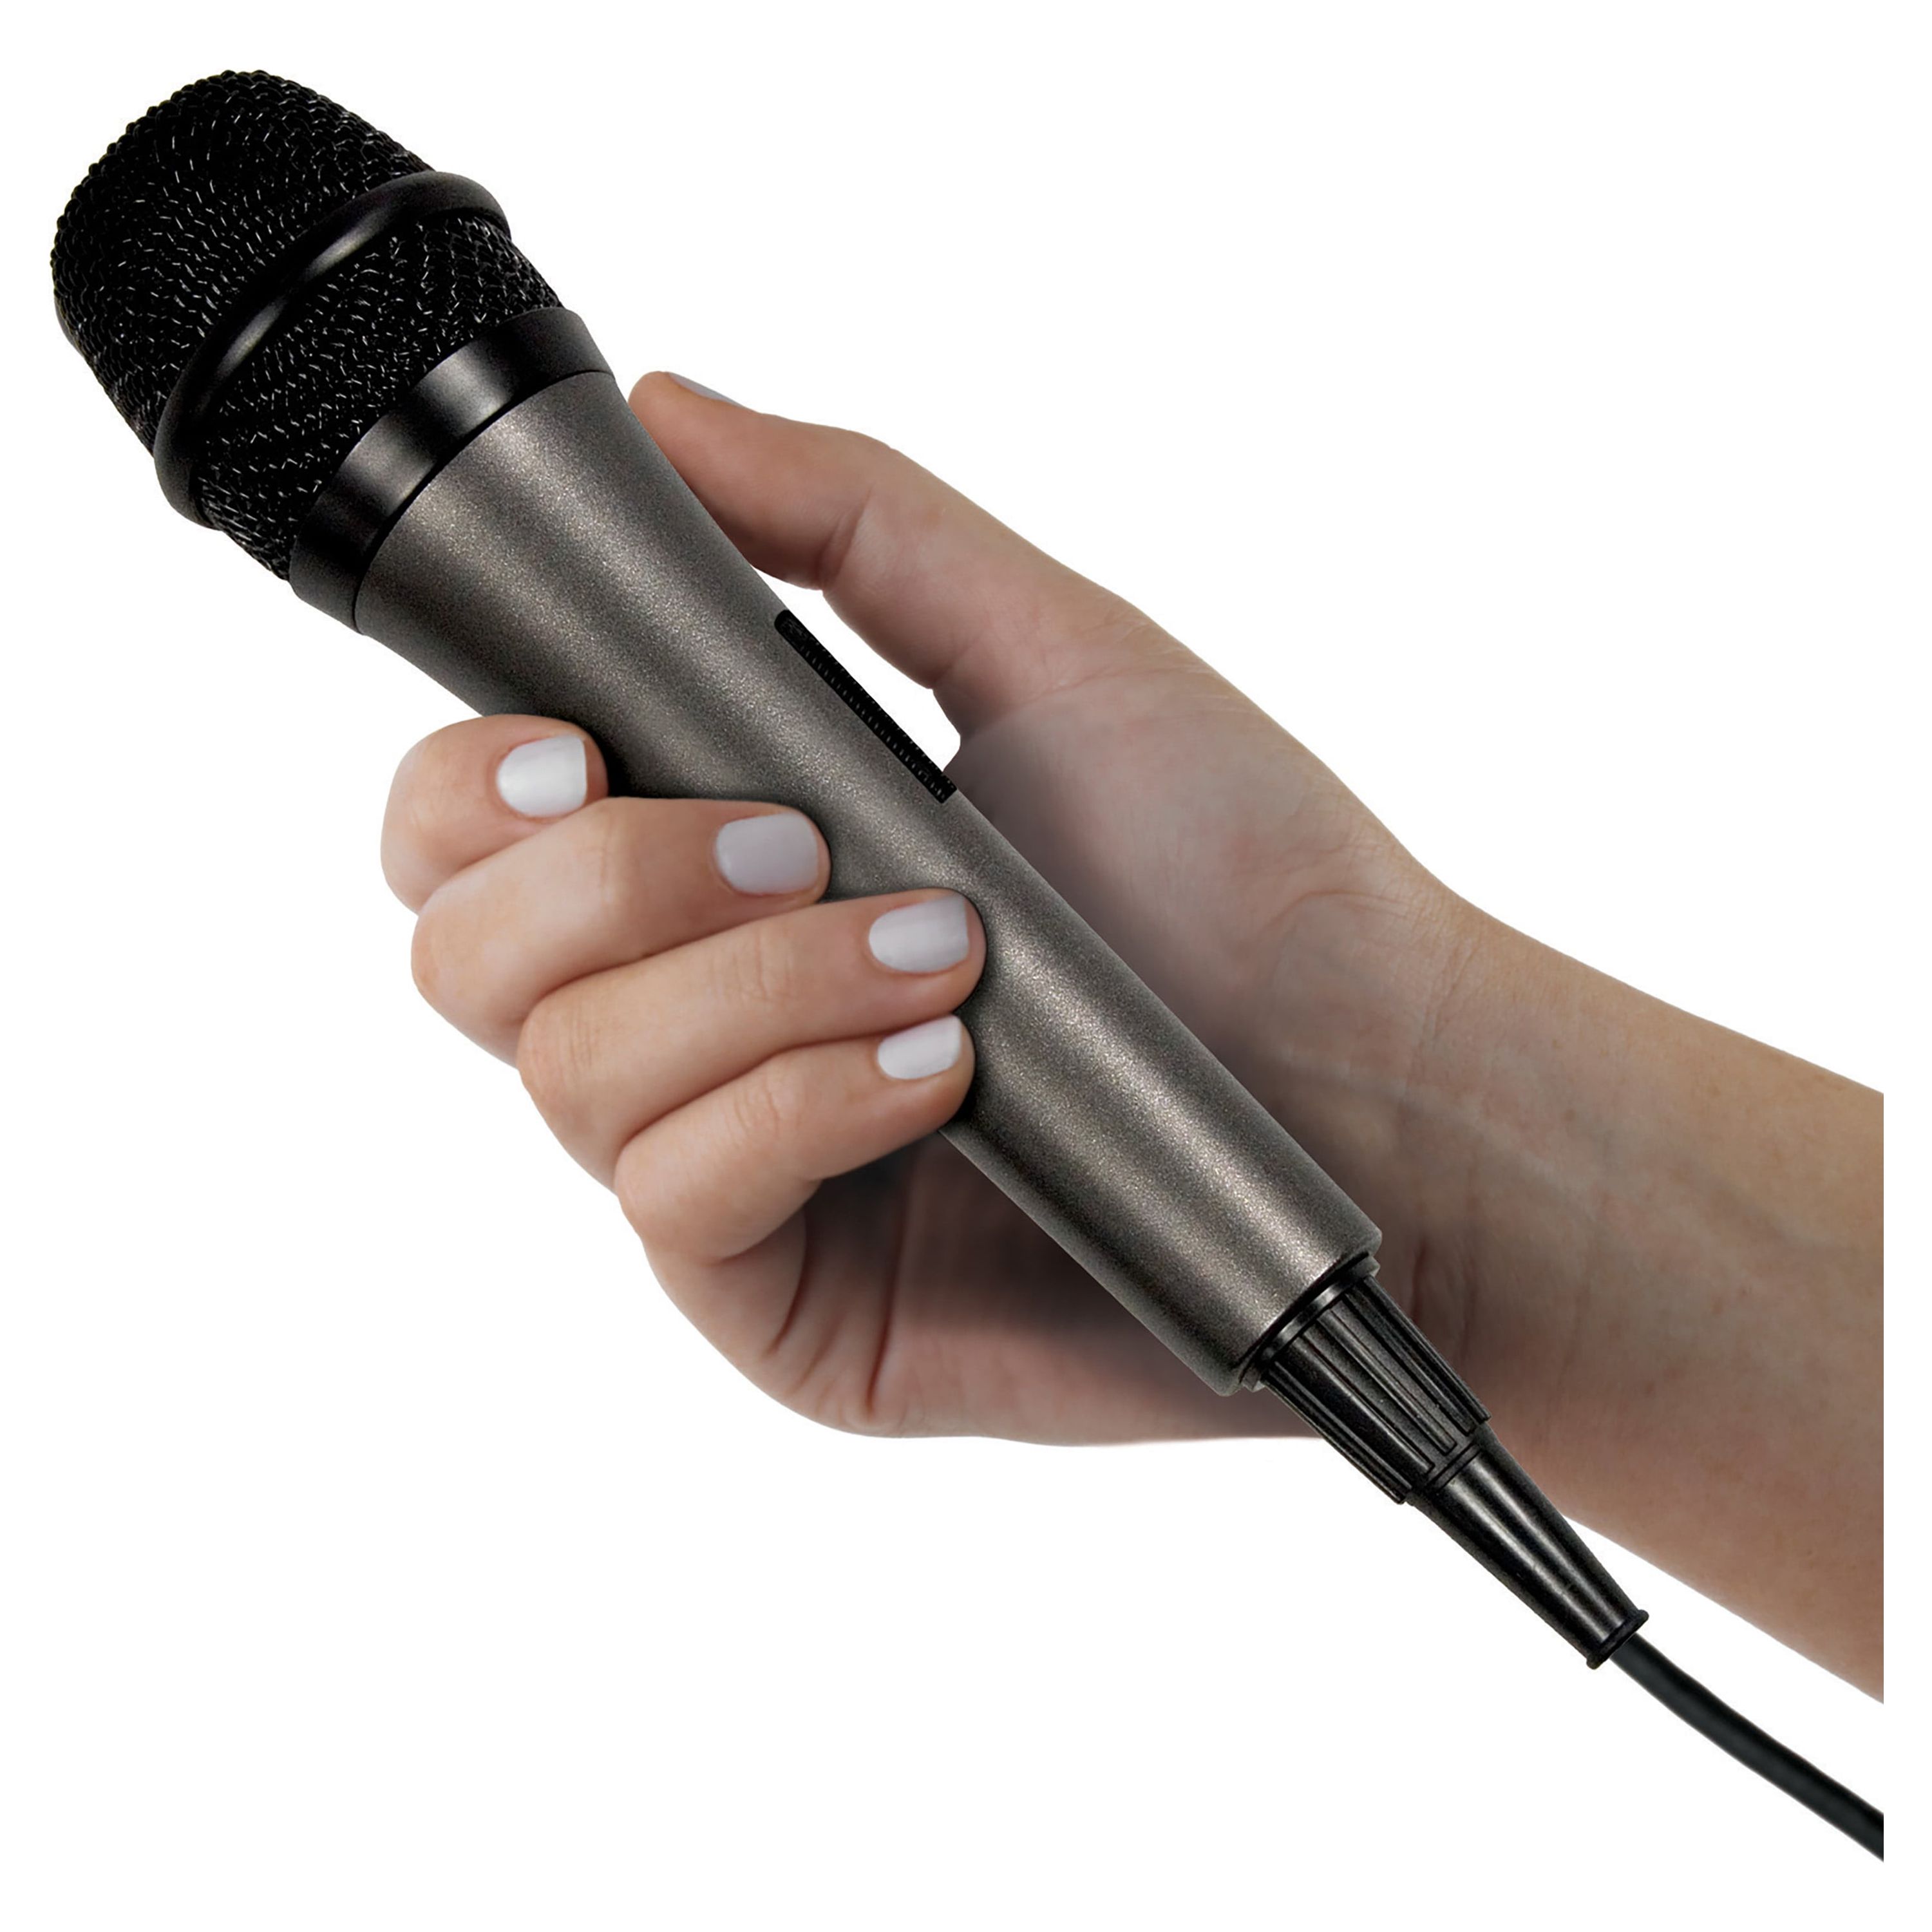 The Singing Machine SMM-205 Unidirectional Microphone - image 1 of 9